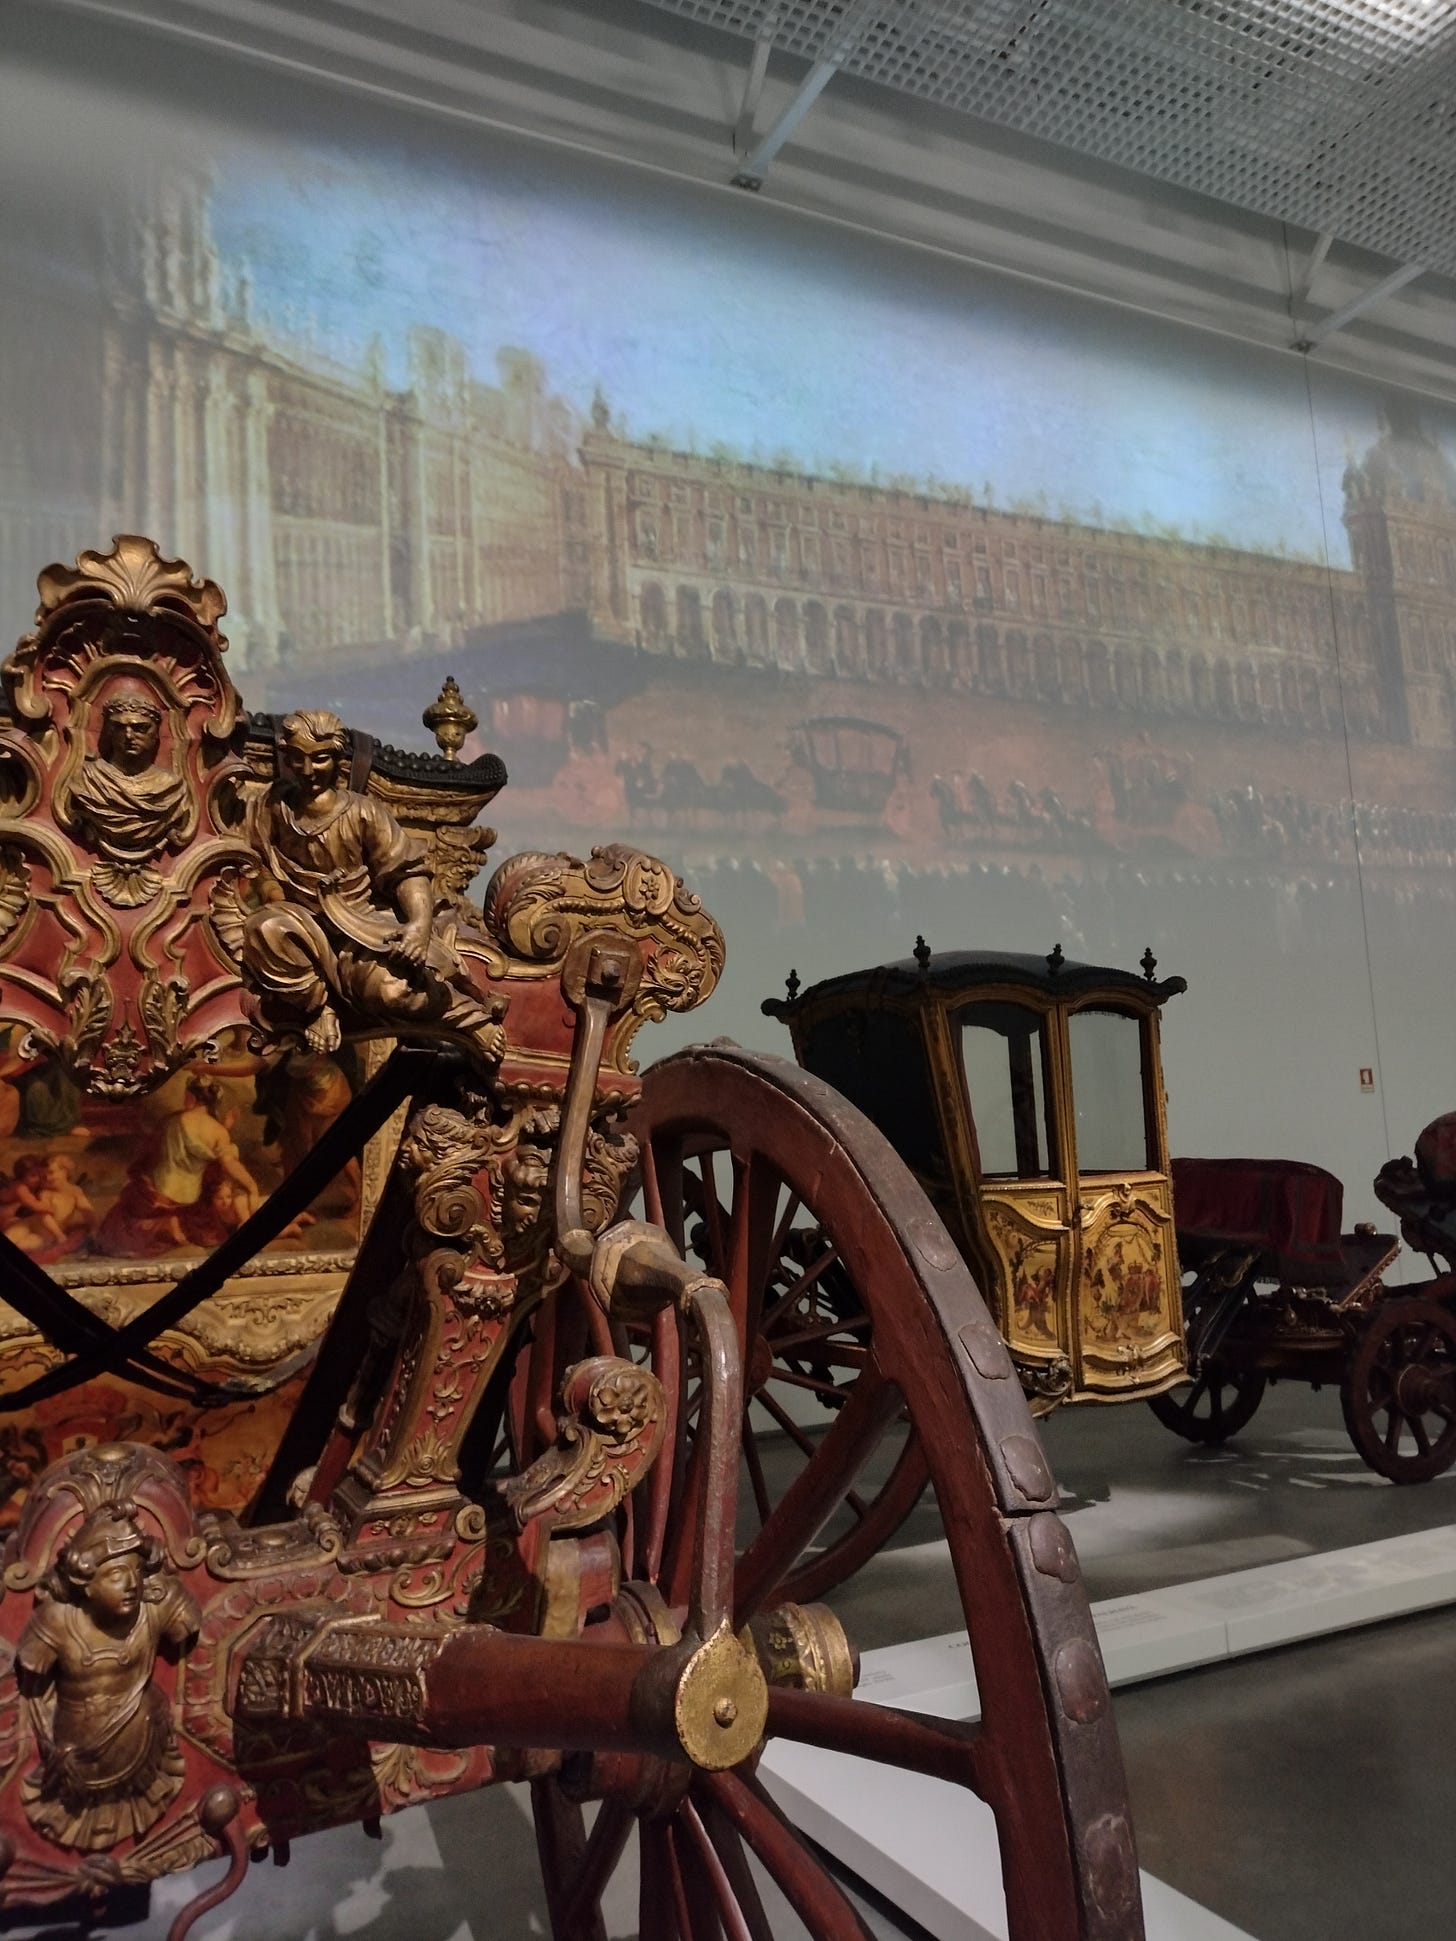 Ornate carriage with a video on the wall.